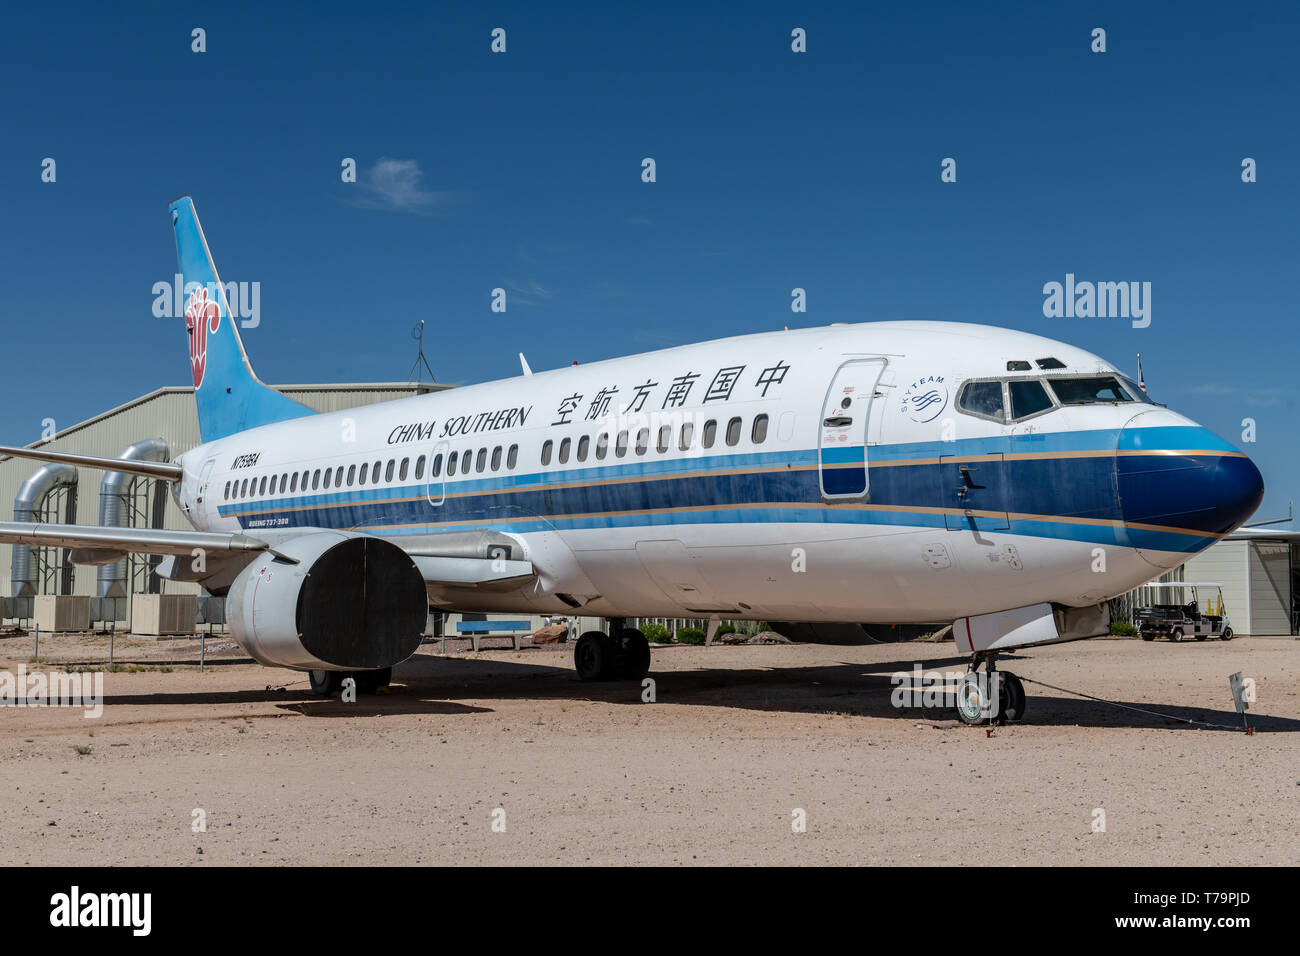 Boeing 737-300 (China Southern Airlines) at Pima Air & Space Museum in Tucson, Arizona Stock Photo